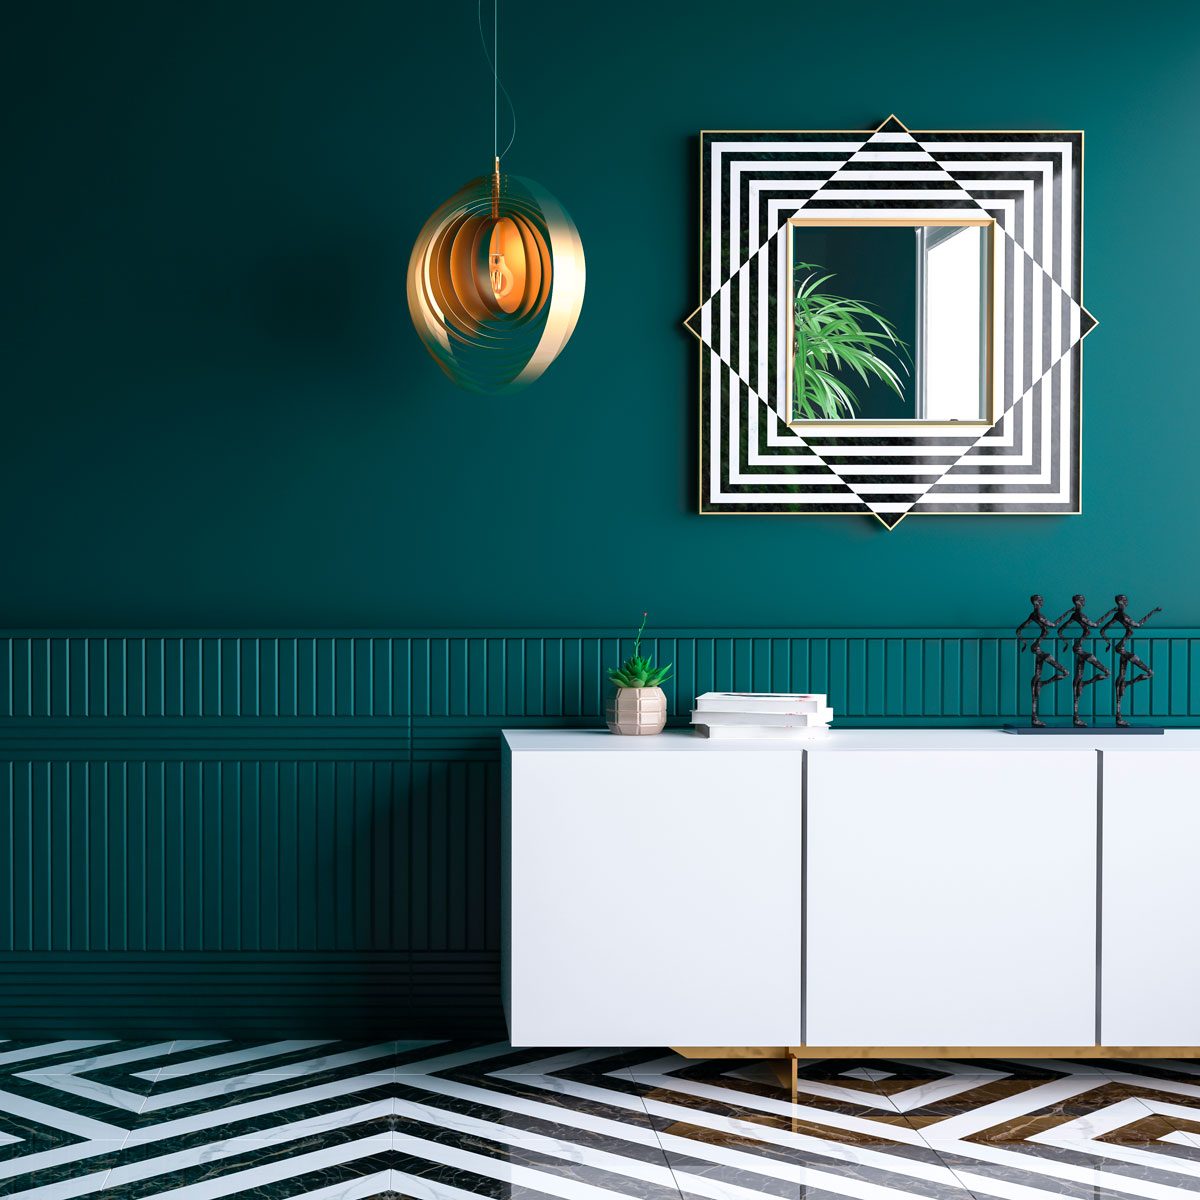 What's Not To Love About Green Wall Paint?